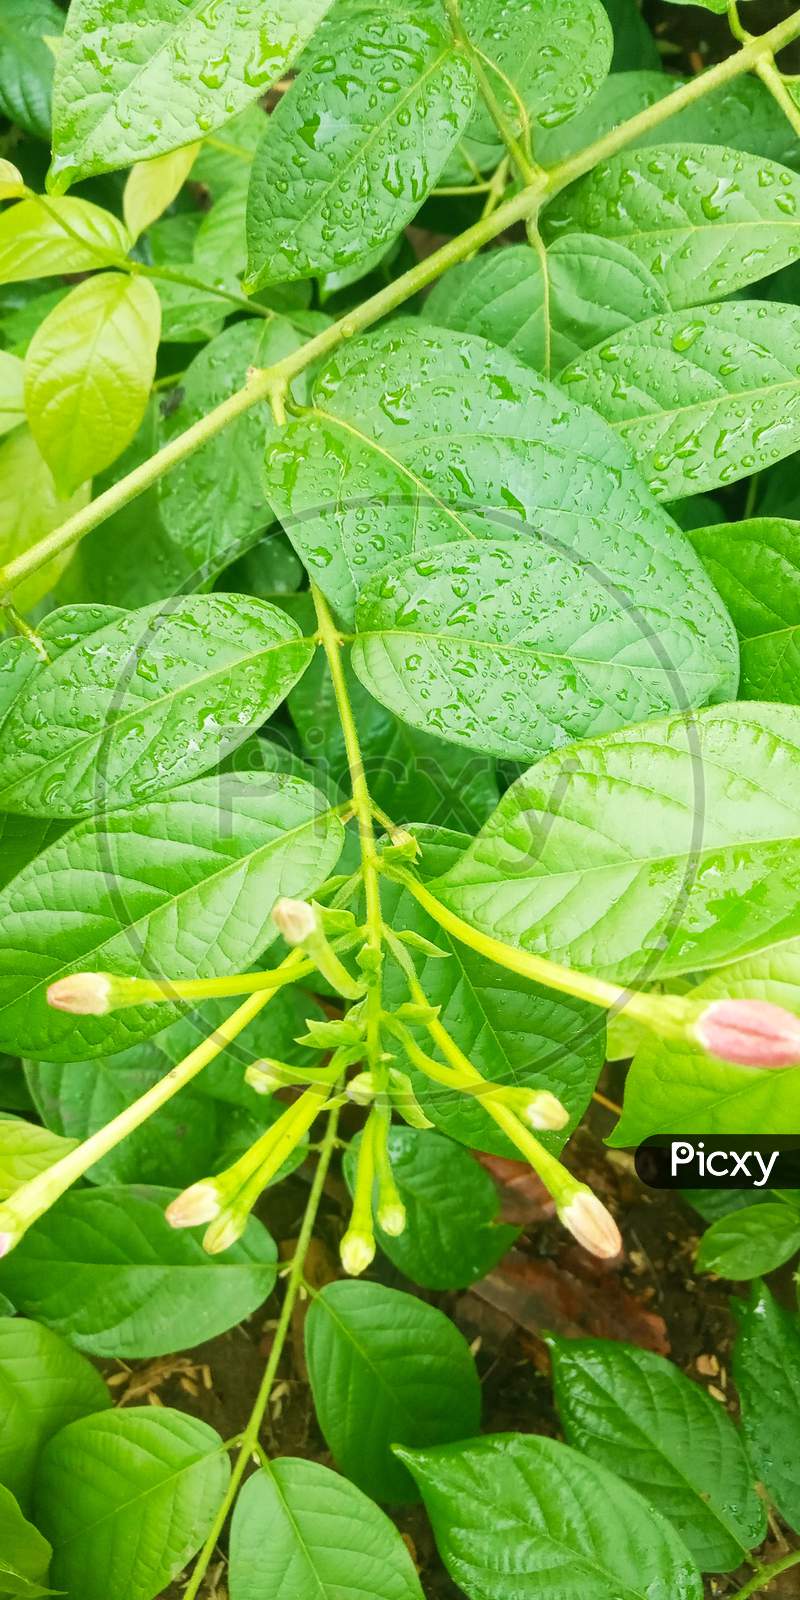 Indian flowering plant with water drops on leaves